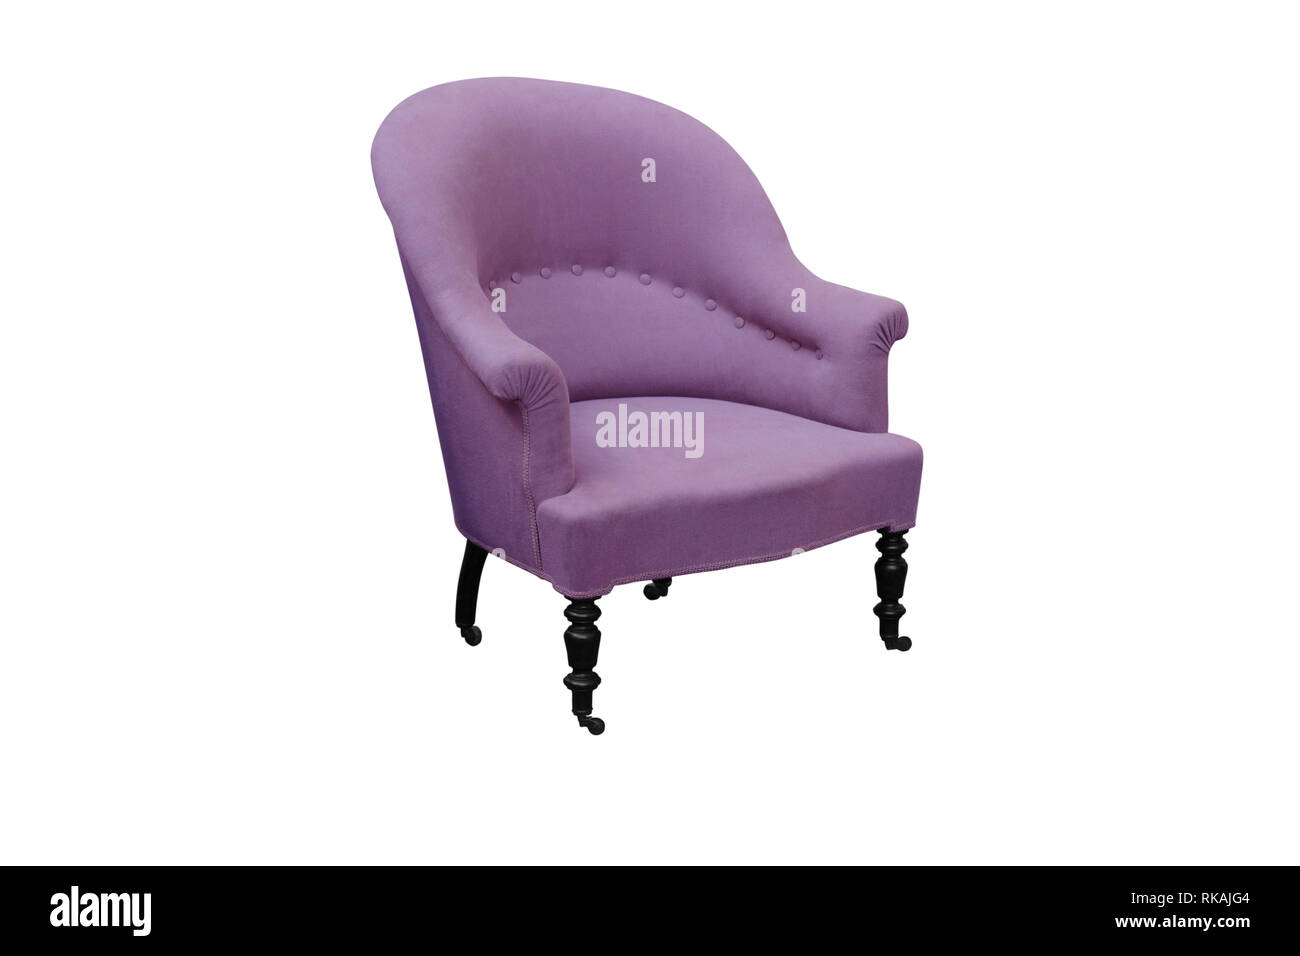 Pink antique arm chair with clipping path on white background Stock Photo